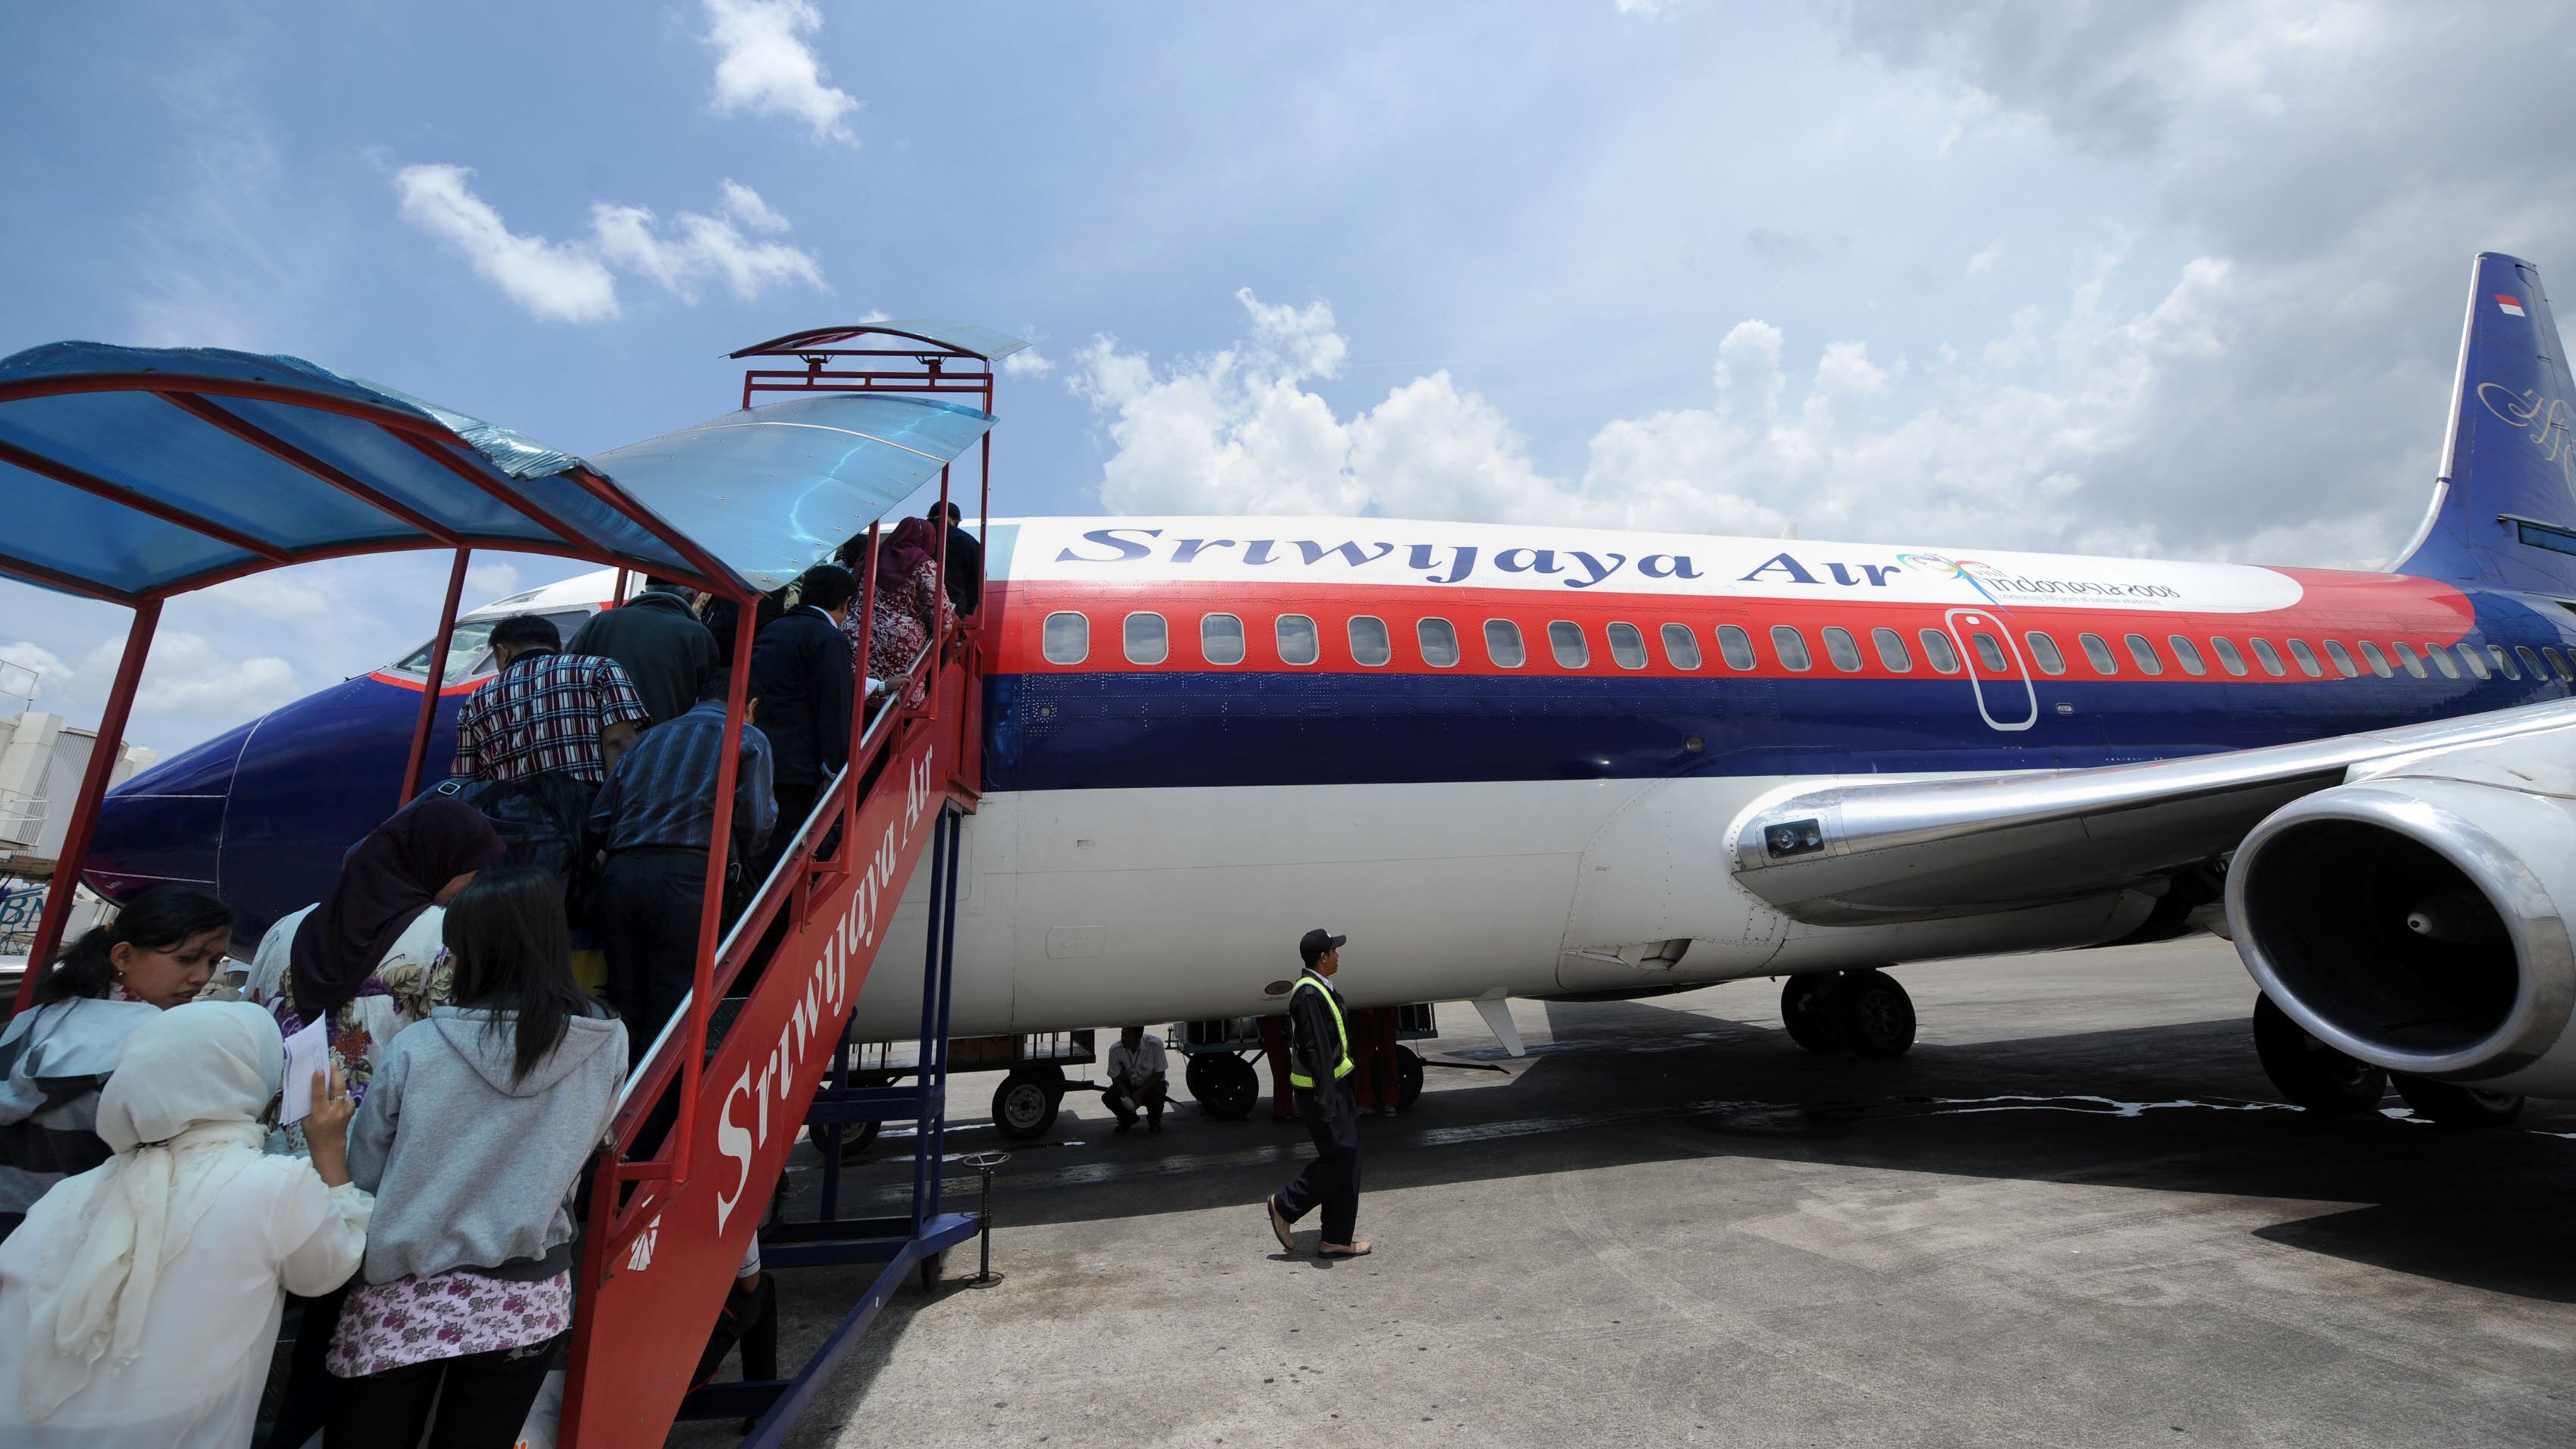 A passenger plane for Indonesian airline